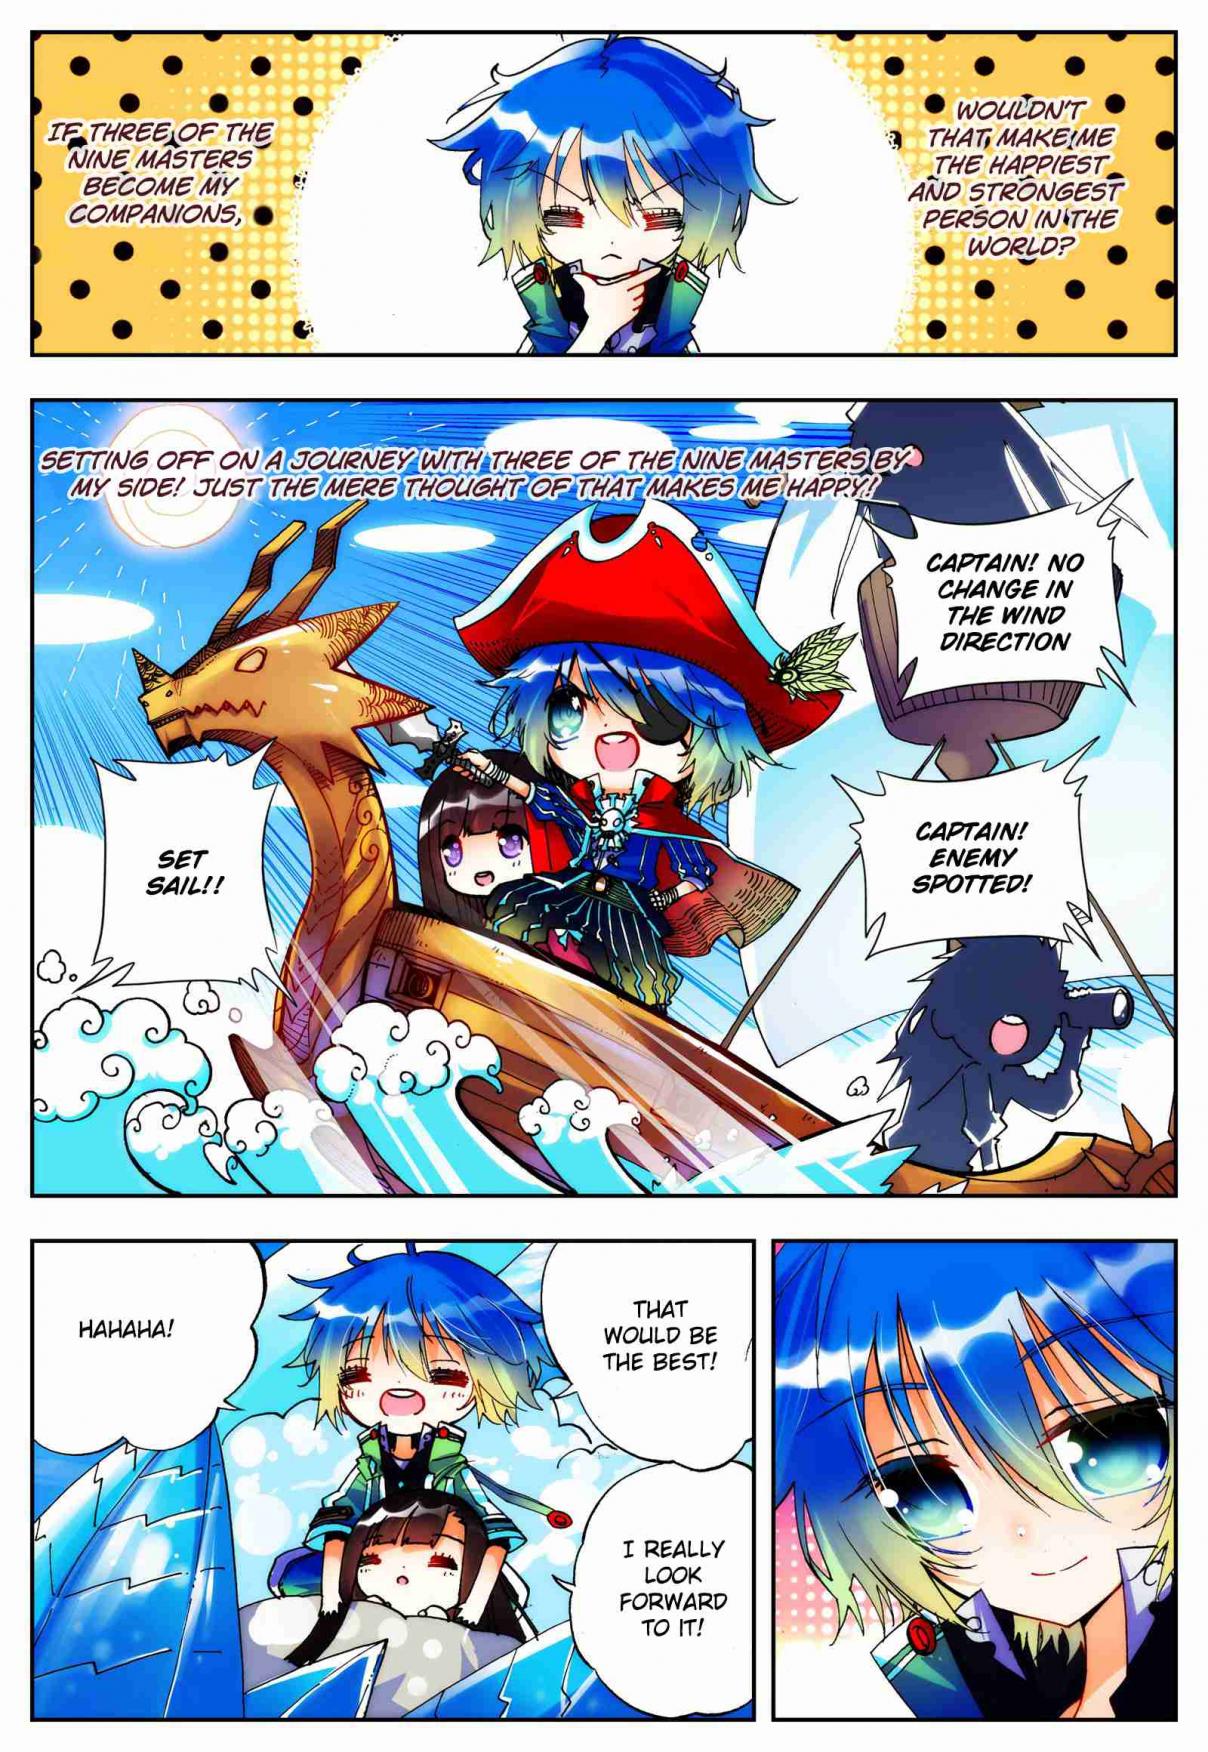 X Epoch of the Dragon Vol. 1 Ch. 18 The Auction